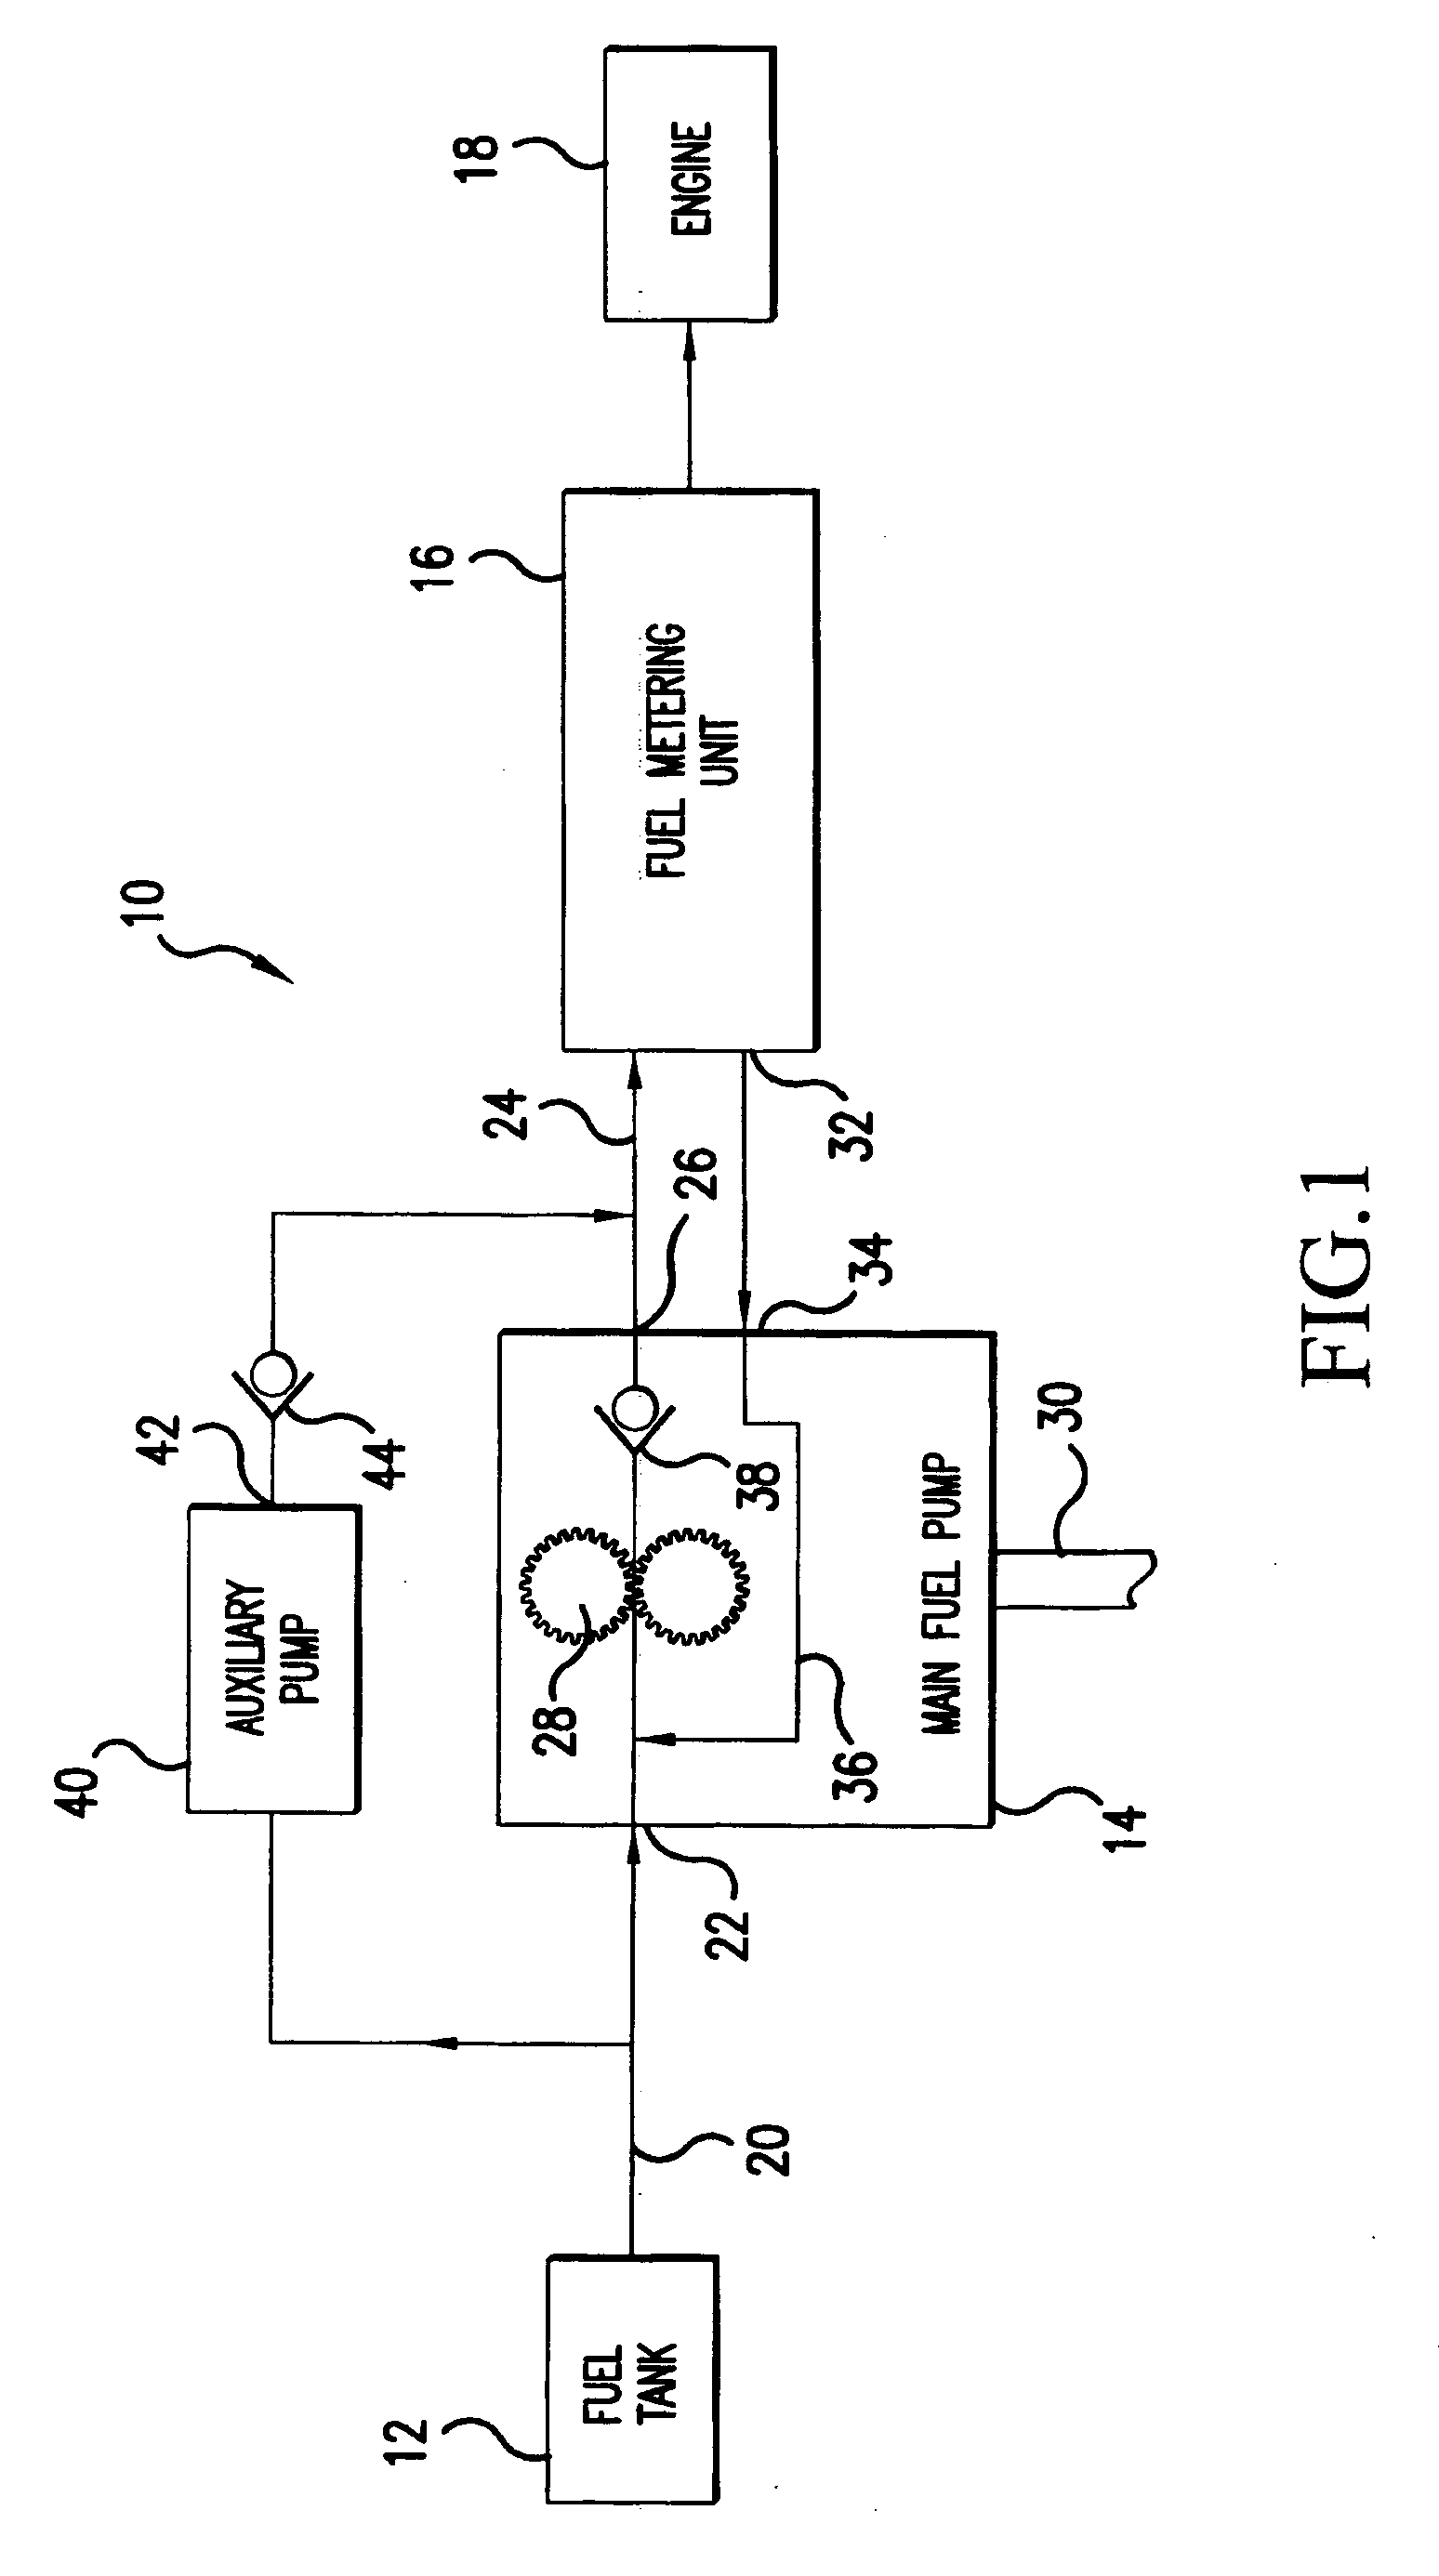 Reduced-weight fuel system for gas turbine engine, gas turbine engine having a reduced-weight fuel system, and method of providing fuel to a gas turbine engine using a reduced-weight fuel system